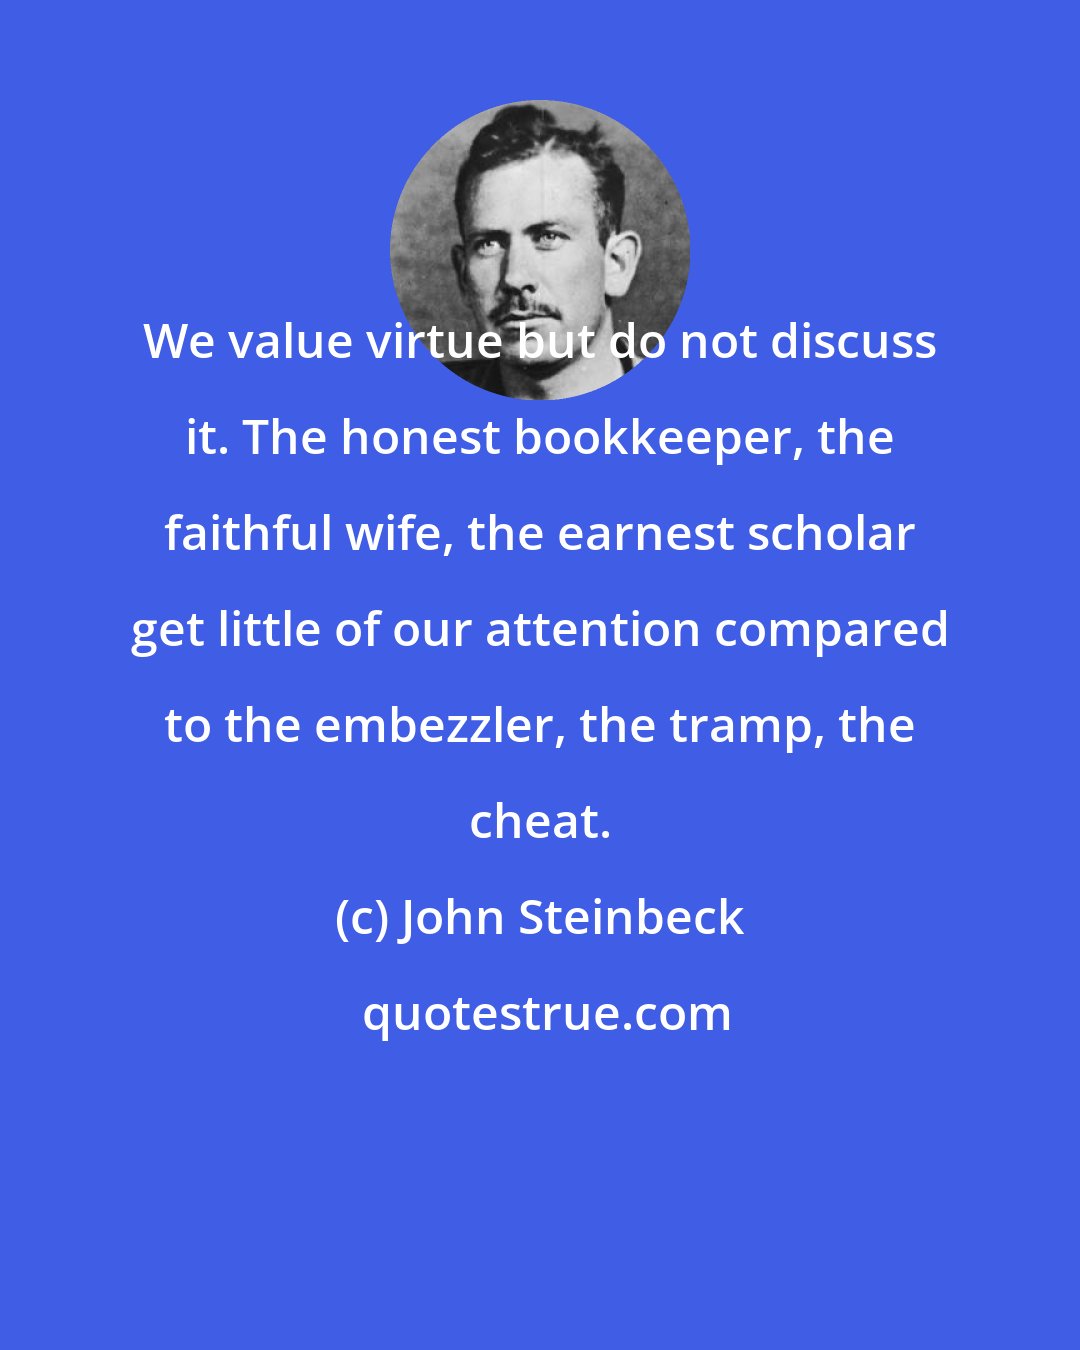 John Steinbeck: We value virtue but do not discuss it. The honest bookkeeper, the faithful wife, the earnest scholar get little of our attention compared to the embezzler, the tramp, the cheat.